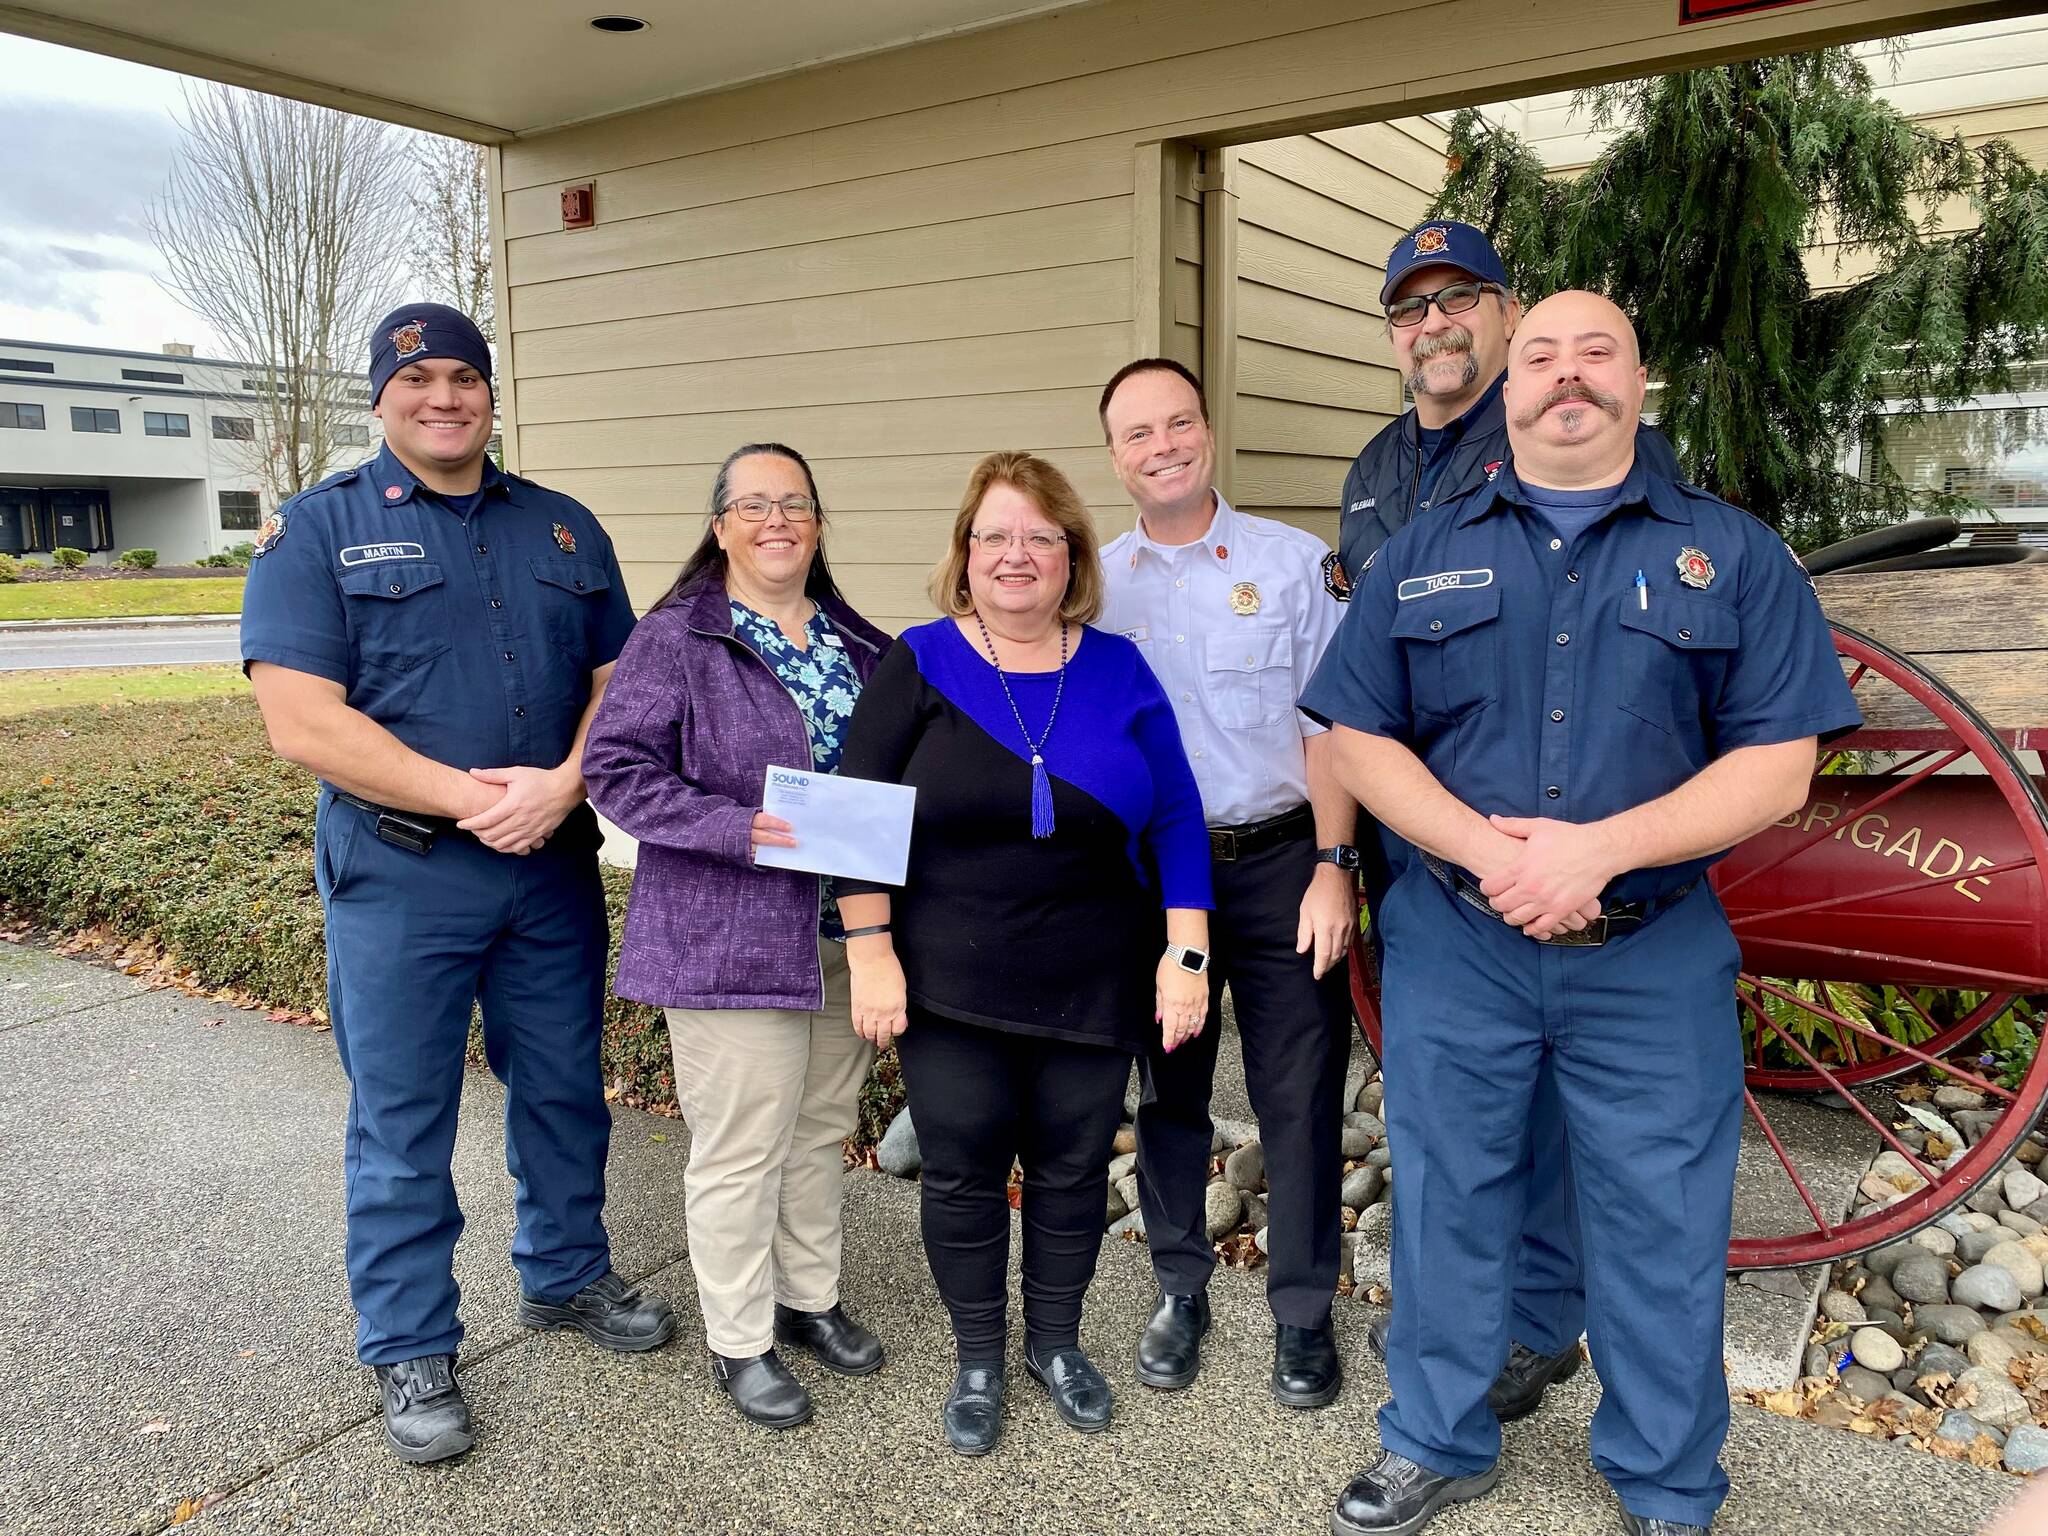 The Auburn Reporter donated some of the proceeds from September’s Local Heroes feature page to the Auburn Food Bank in honor of the Valley Regional Fire Authority. Pictured from left to right: Captain Aaron Martin, Laura Theimer of the Auburn Reporter, Debbie Christian of the Auburn Food Bank, Fire Chief Brad Thompson, Firefighter Tim Coleman, and Firefighter Ross Tucci. Courtesy photo